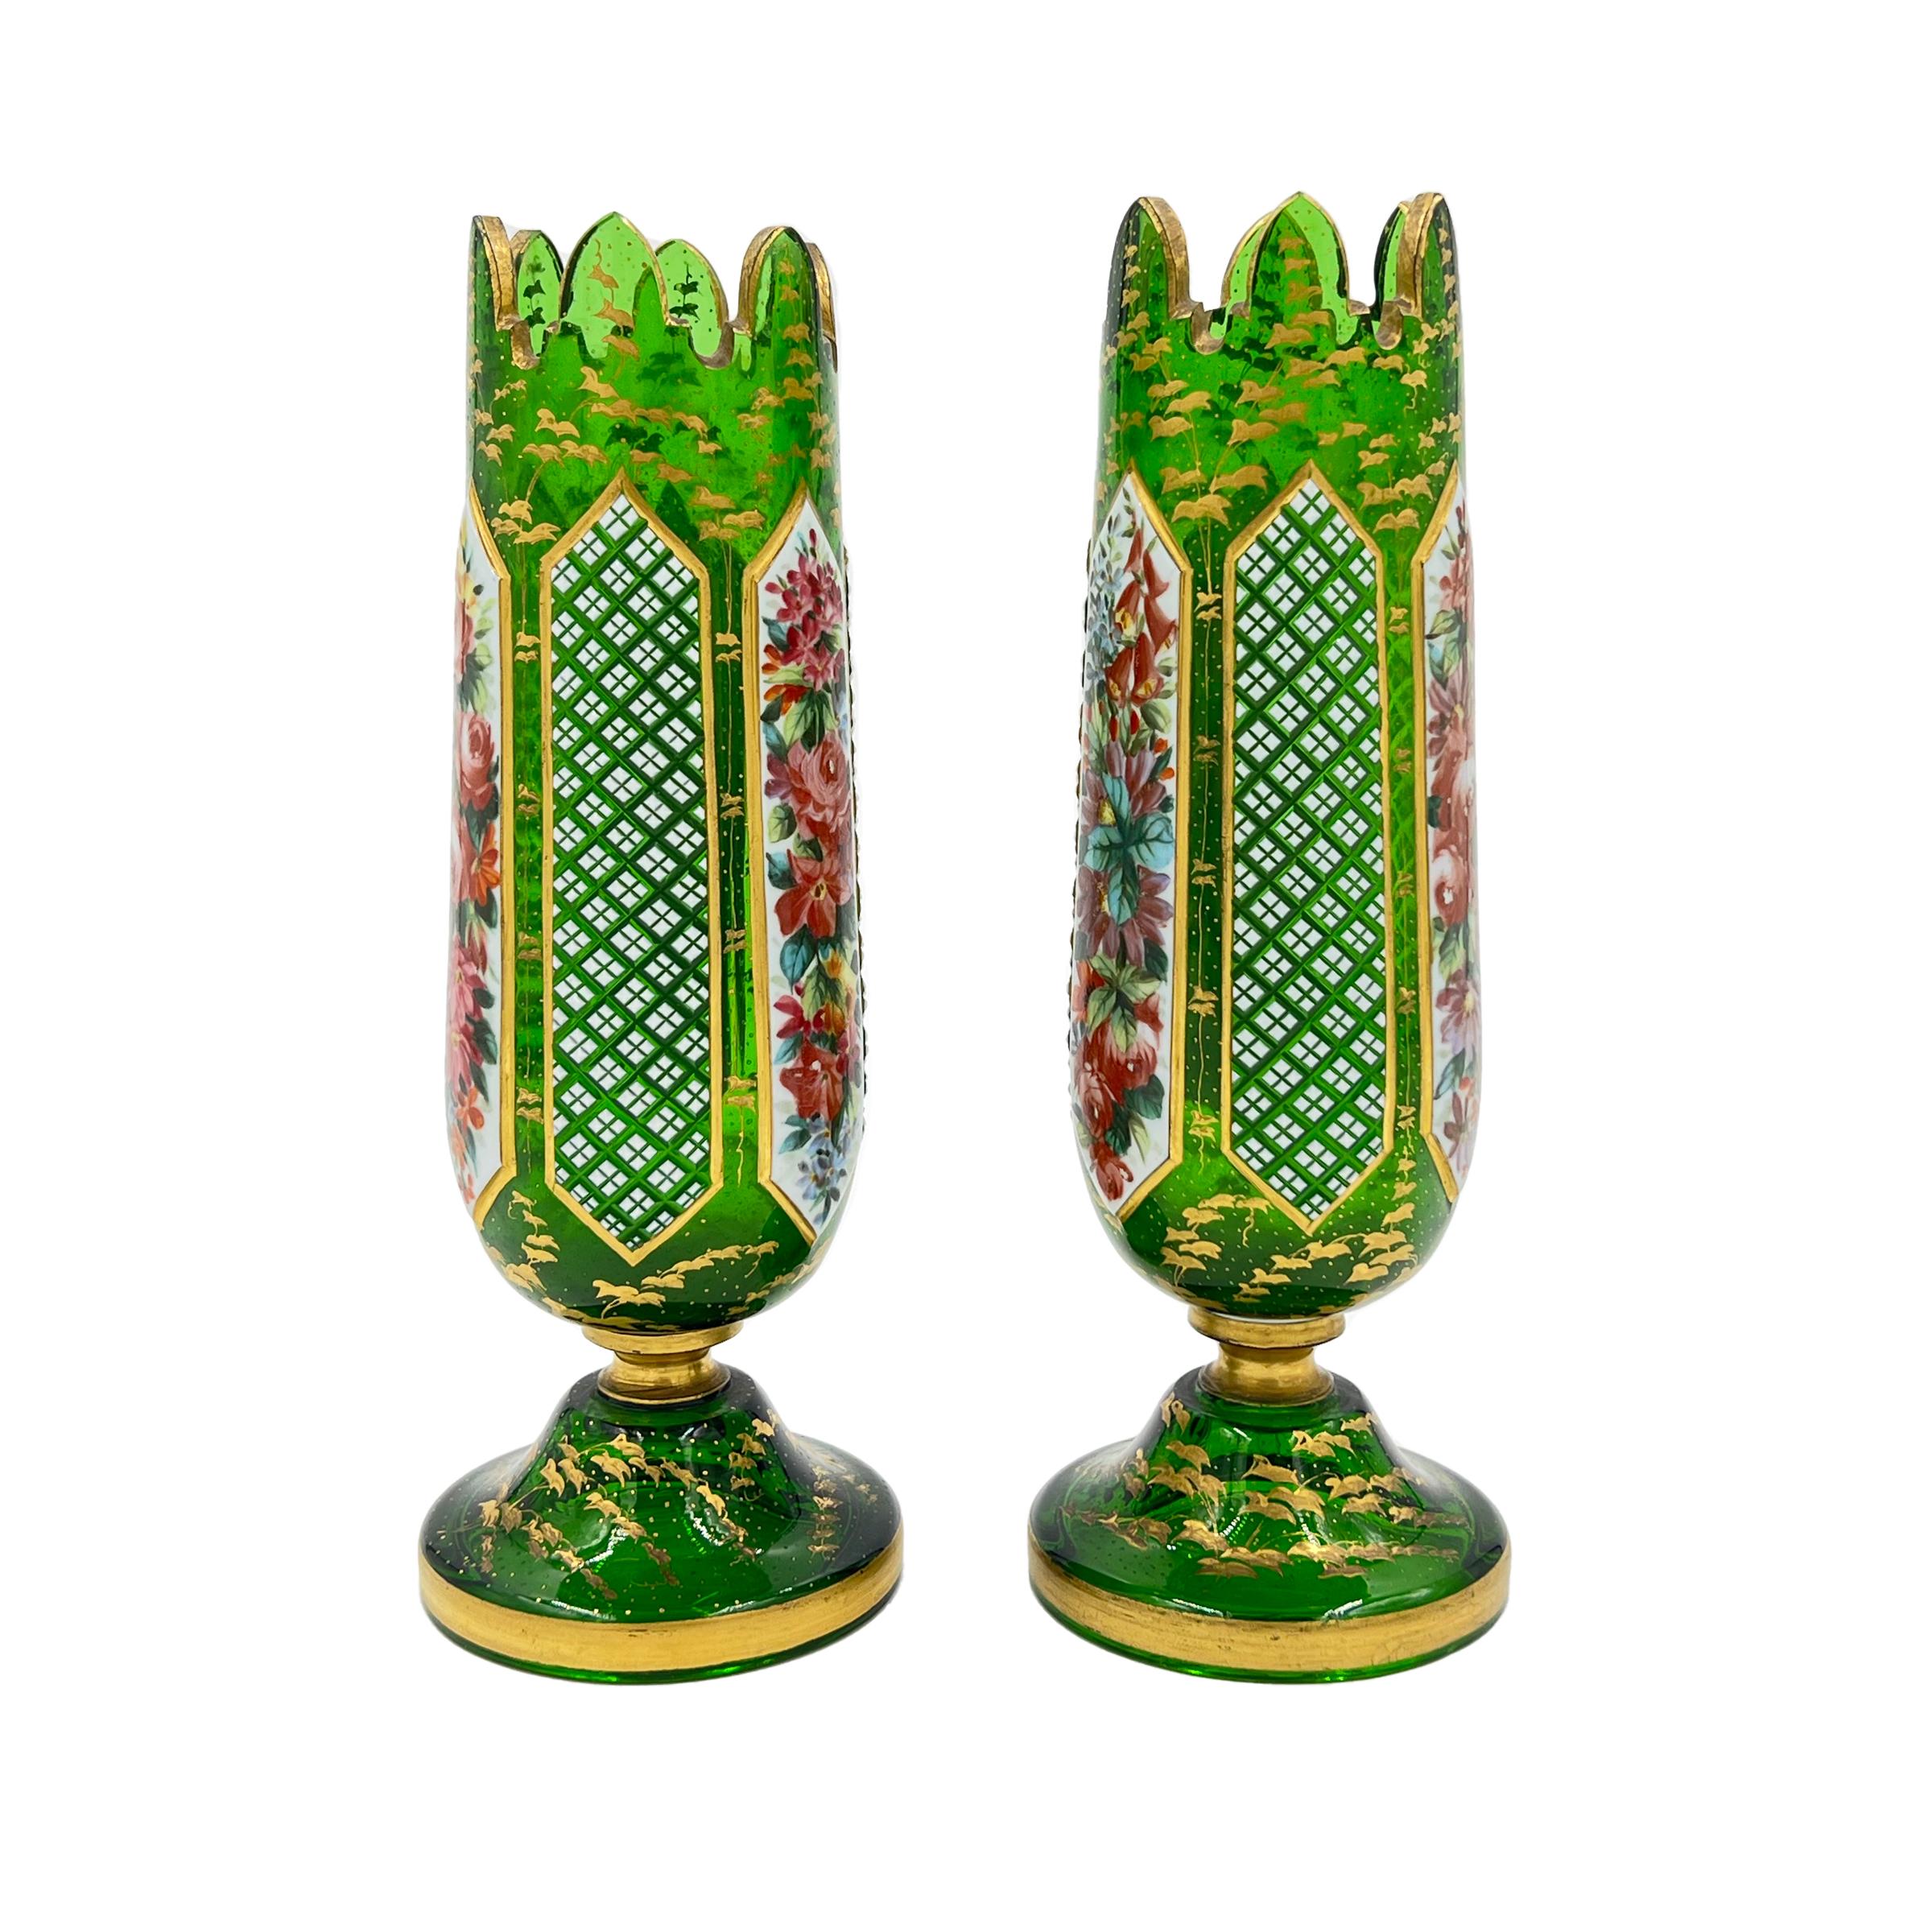 A pair of 19th century bohemian flashed glass vases for the Persian/Oriental market, decorated with white overlay glass panels painted profusely with flowers, interspersed with diamond cut panels, raised on domed feet with gilt decoration of